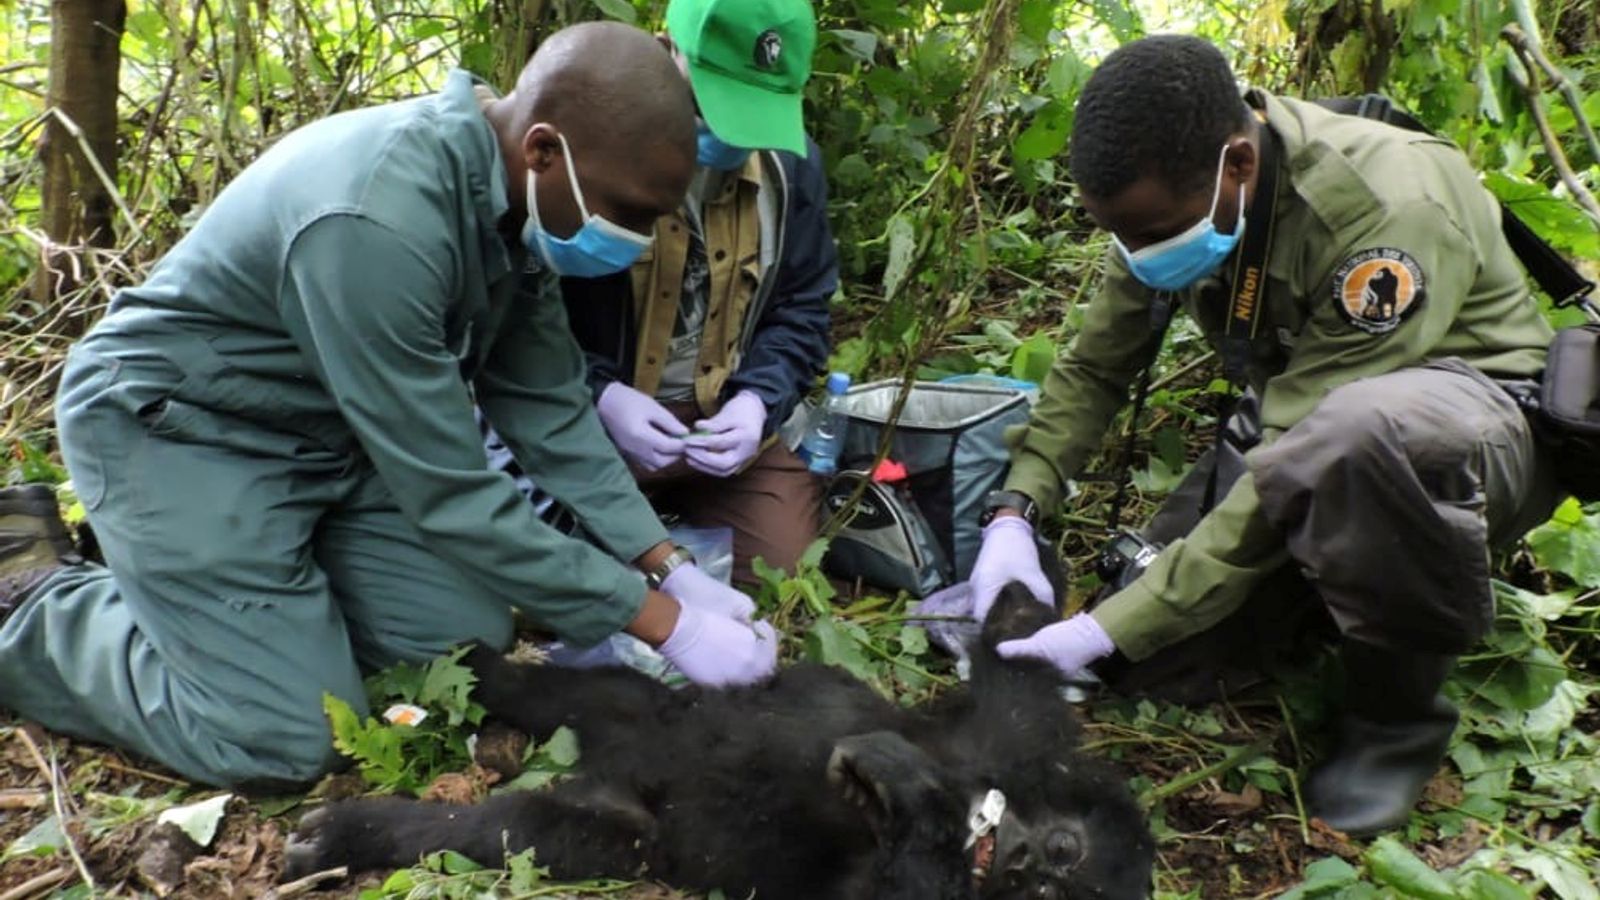 Young gorilla trapped in poacher's snare saved by park rangers in